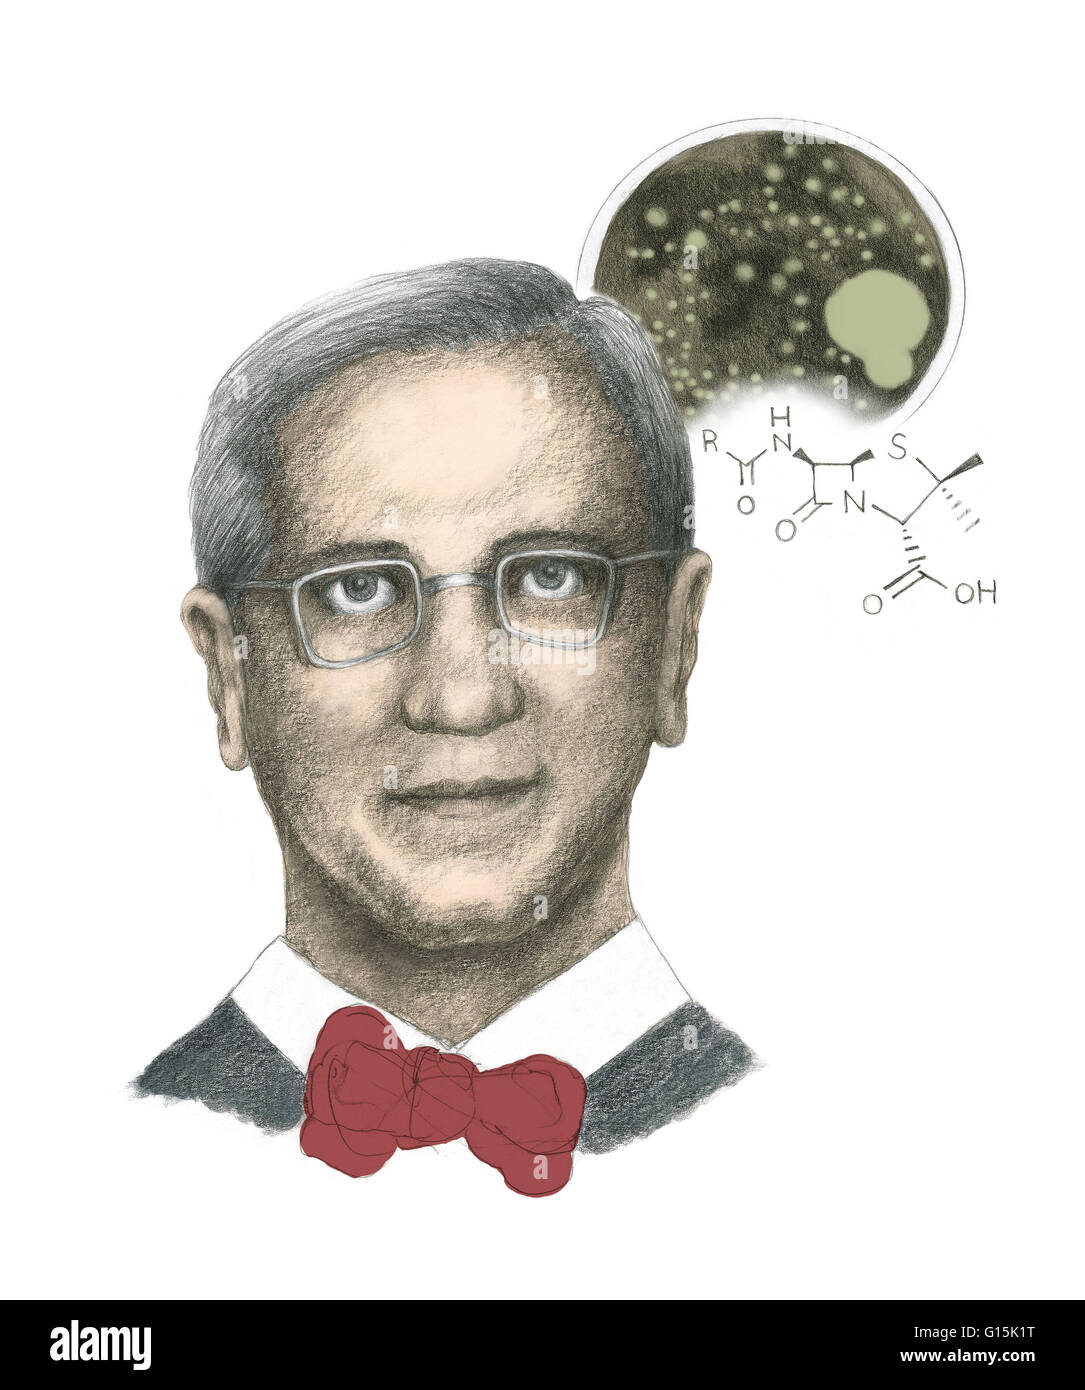 Illustration of Alexander Fleming (August 6, 1881 - March 11,1955), the Scottish biologist most famous for discovering penicillin in 1928. He is depicted here with a petri dish containing Penicillium notatum (the mold from which the antibiotic penicillin Stock Photo